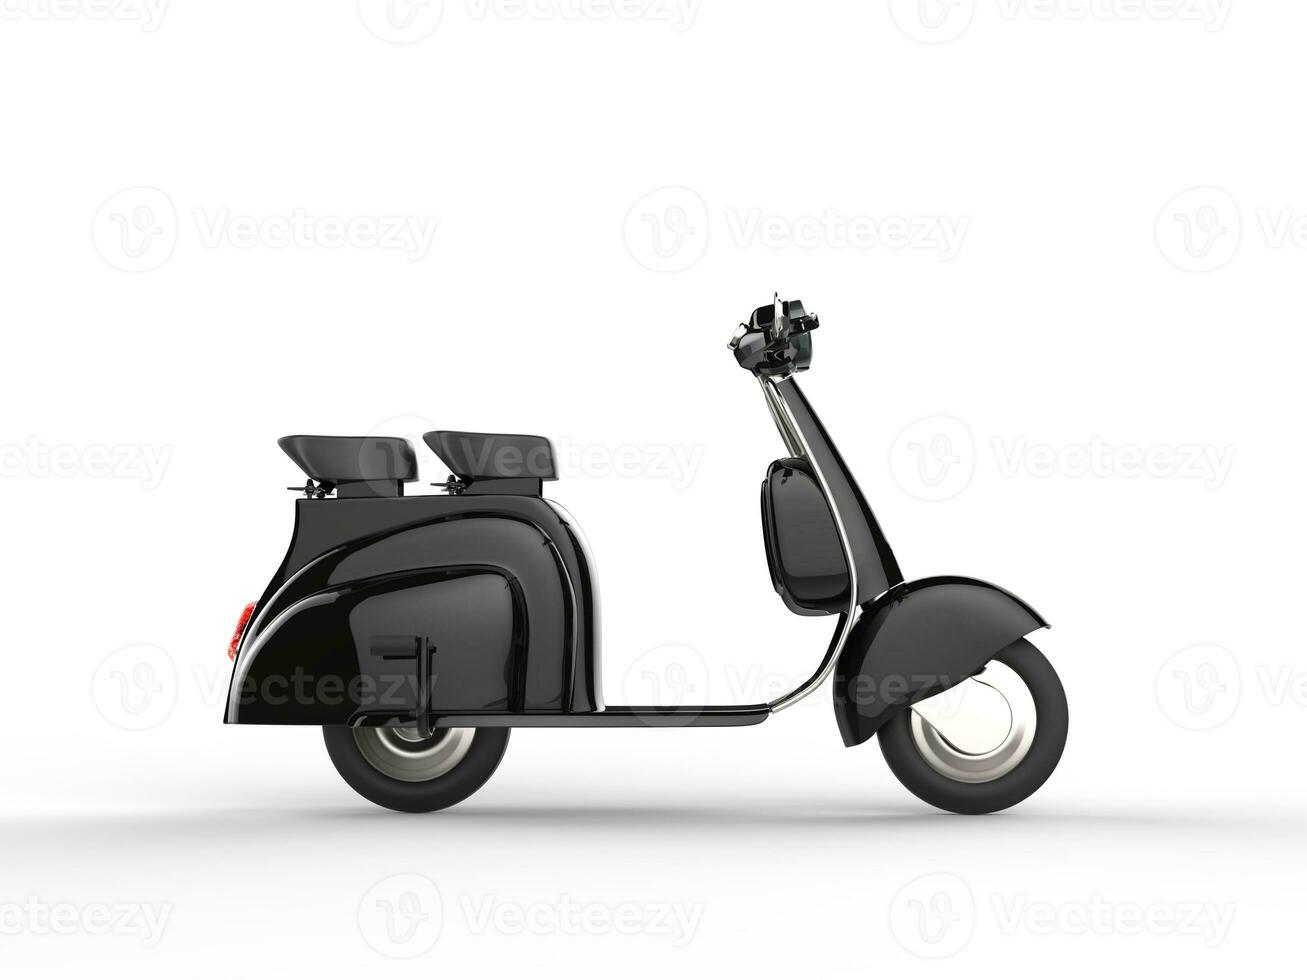 Black scooter - side view photo